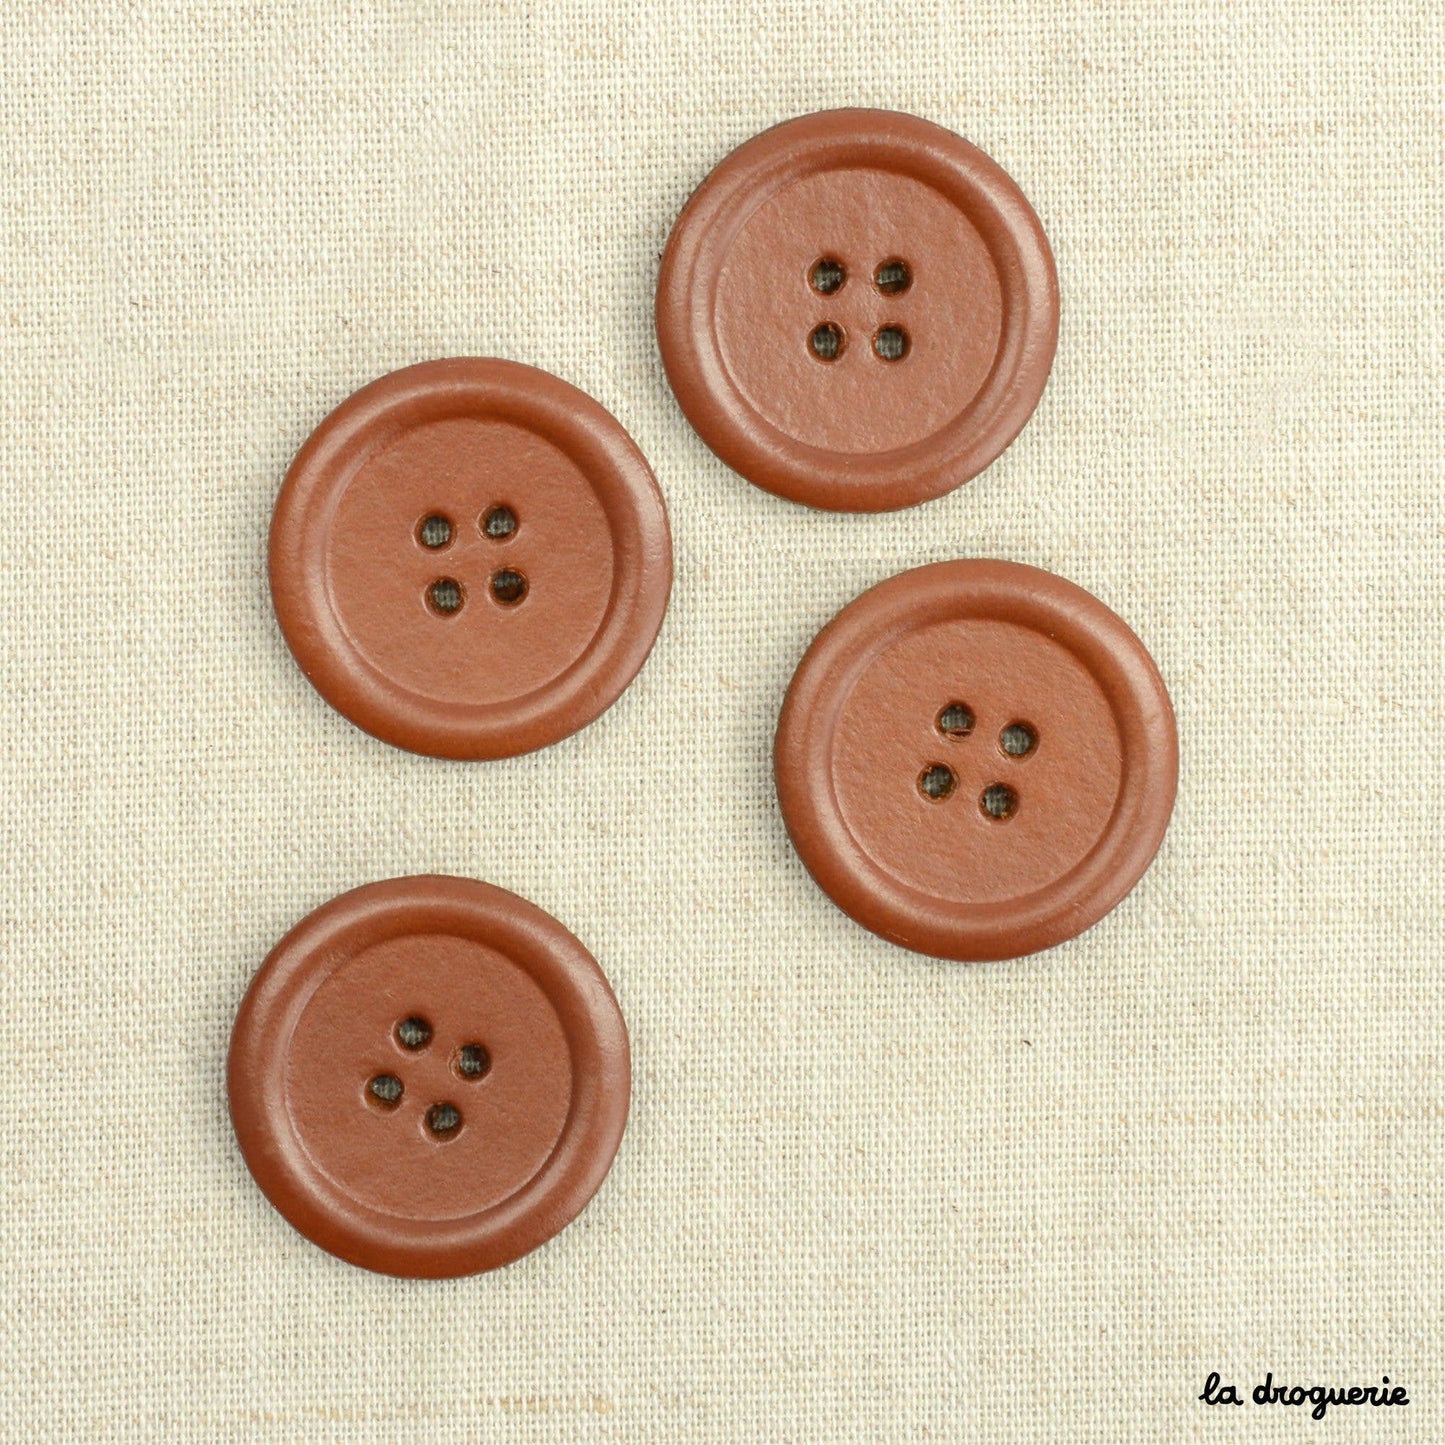 “Recy-leather small edge 4-hole” button 25 mm